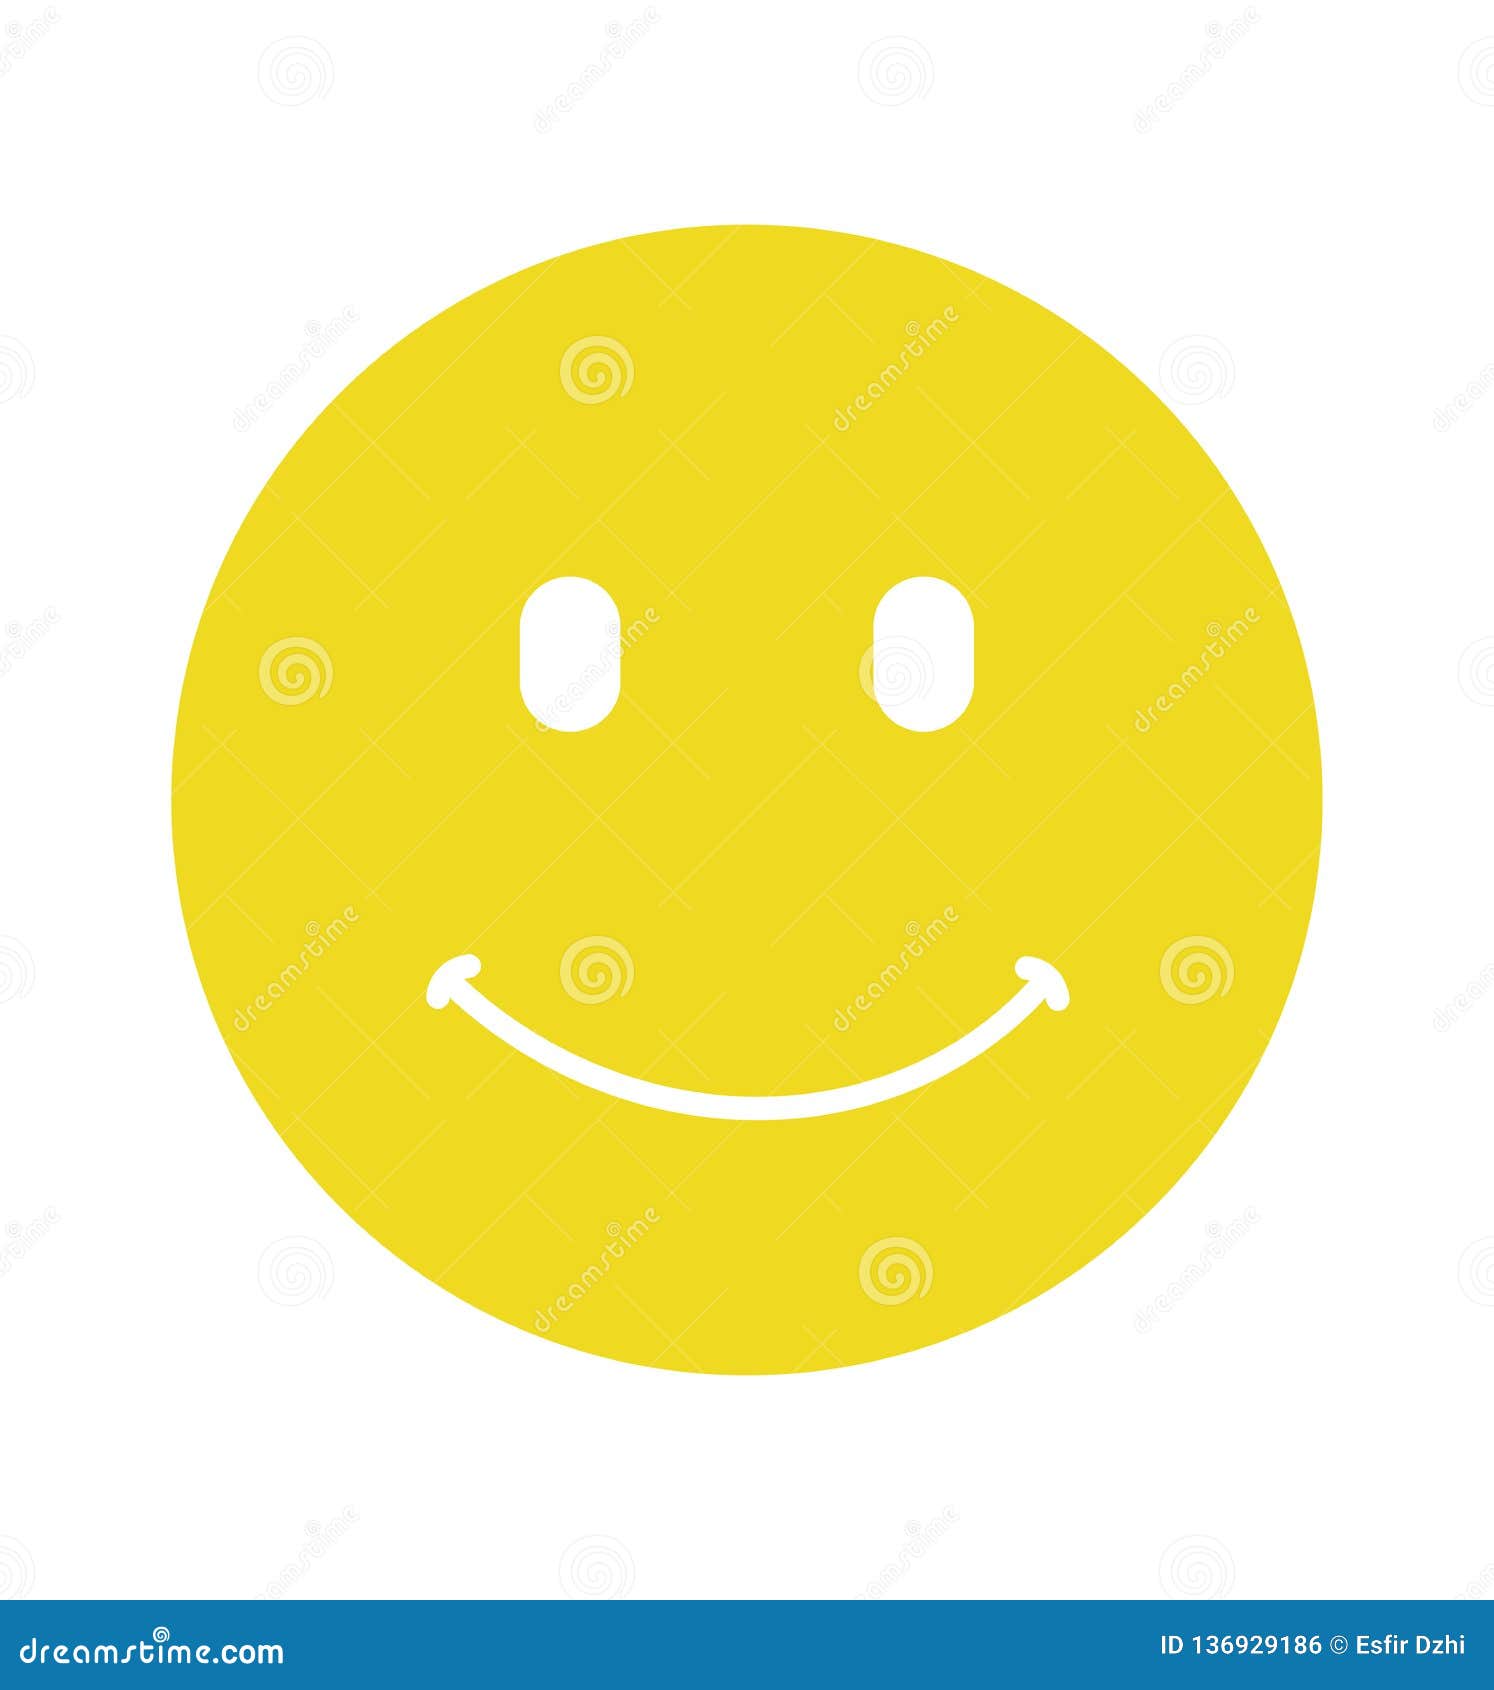 Smiley Happy Face Vector Flat Isolated on White Stock Vector ...